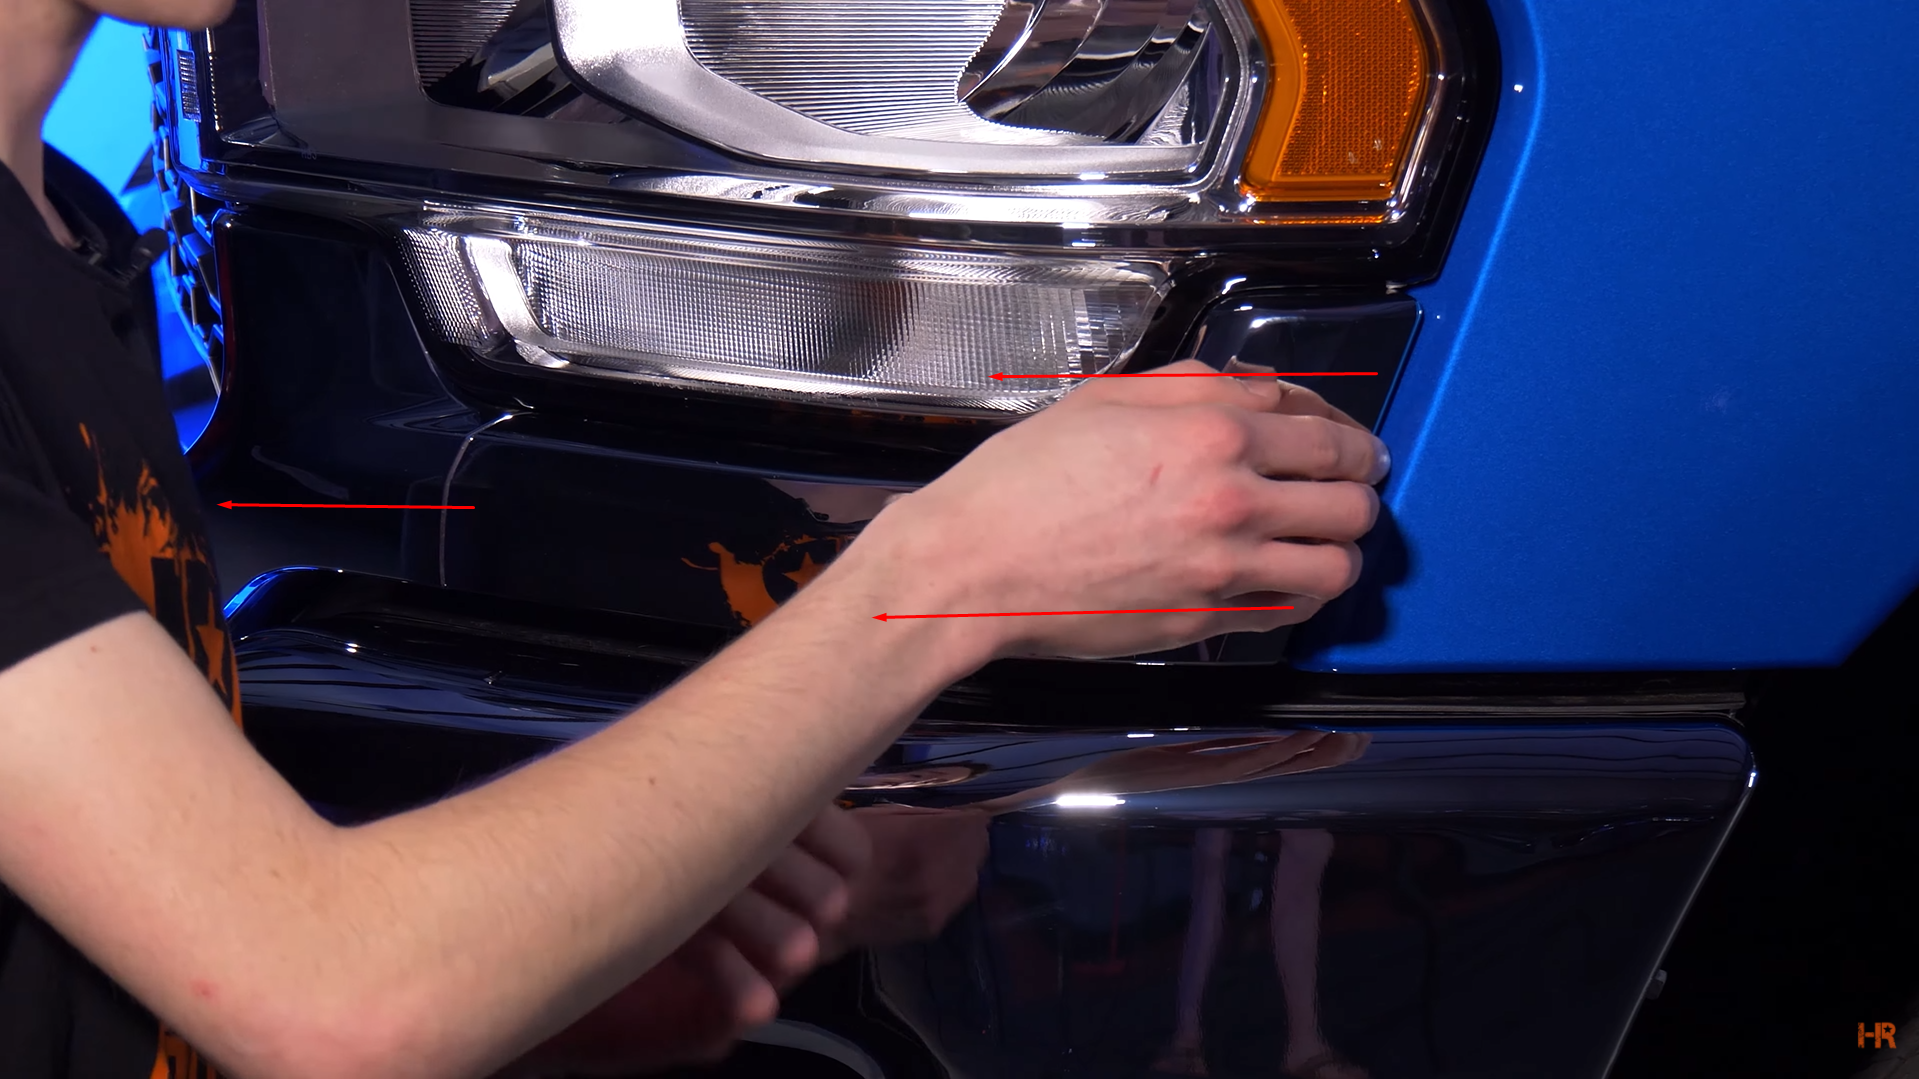 Instructions on how to remove the chrome panel beneath the Ram HD headlights.